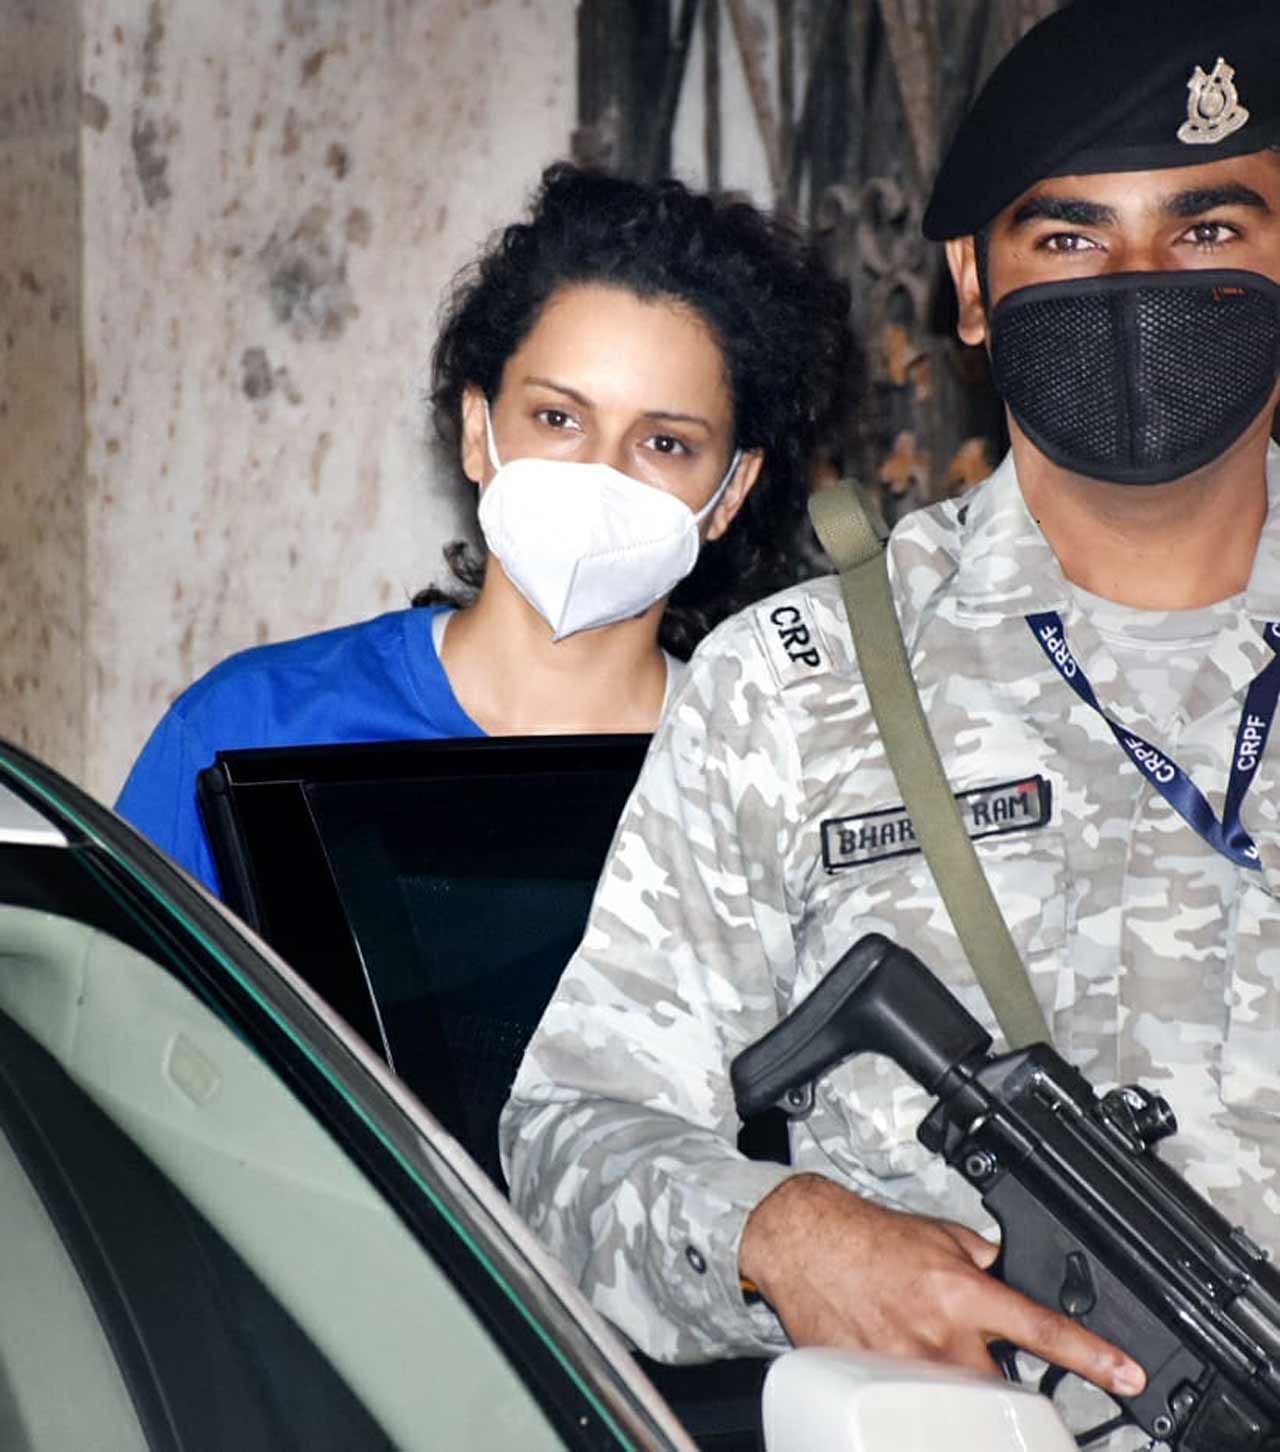 Moving around with security cover since September 2020, wonder what Kangana Ranaut does for alone time, especially as she is also escorted to the gym with armed CRPF commandos.